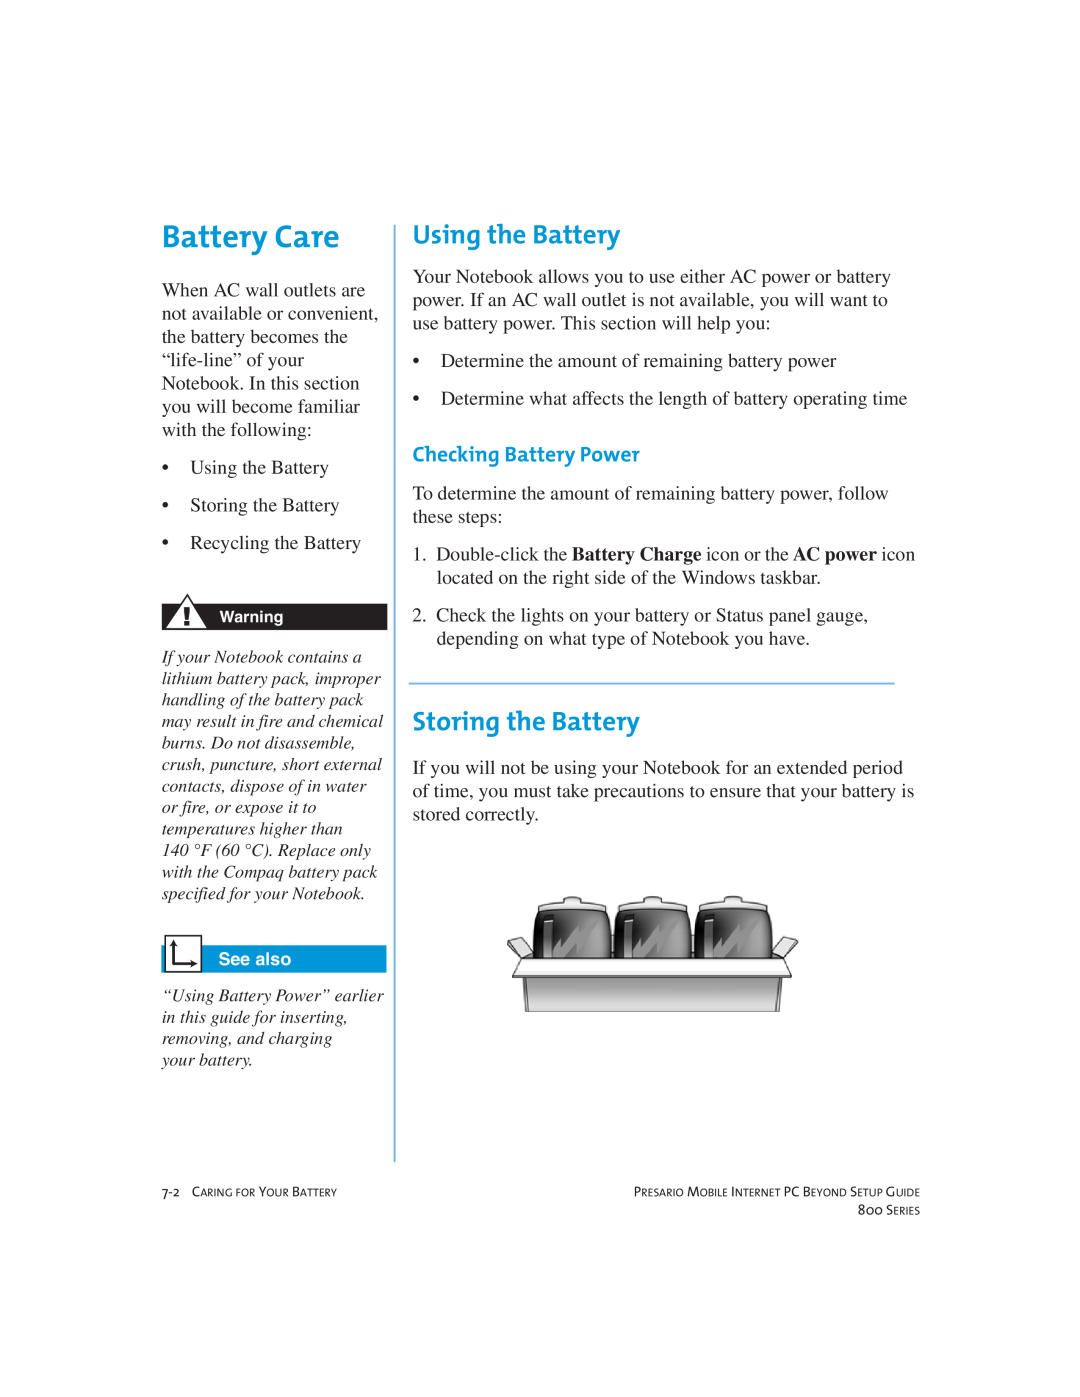 Compaq 800 manual Battery Care, Using the Battery, Storing the Battery, Checking Battery Power 